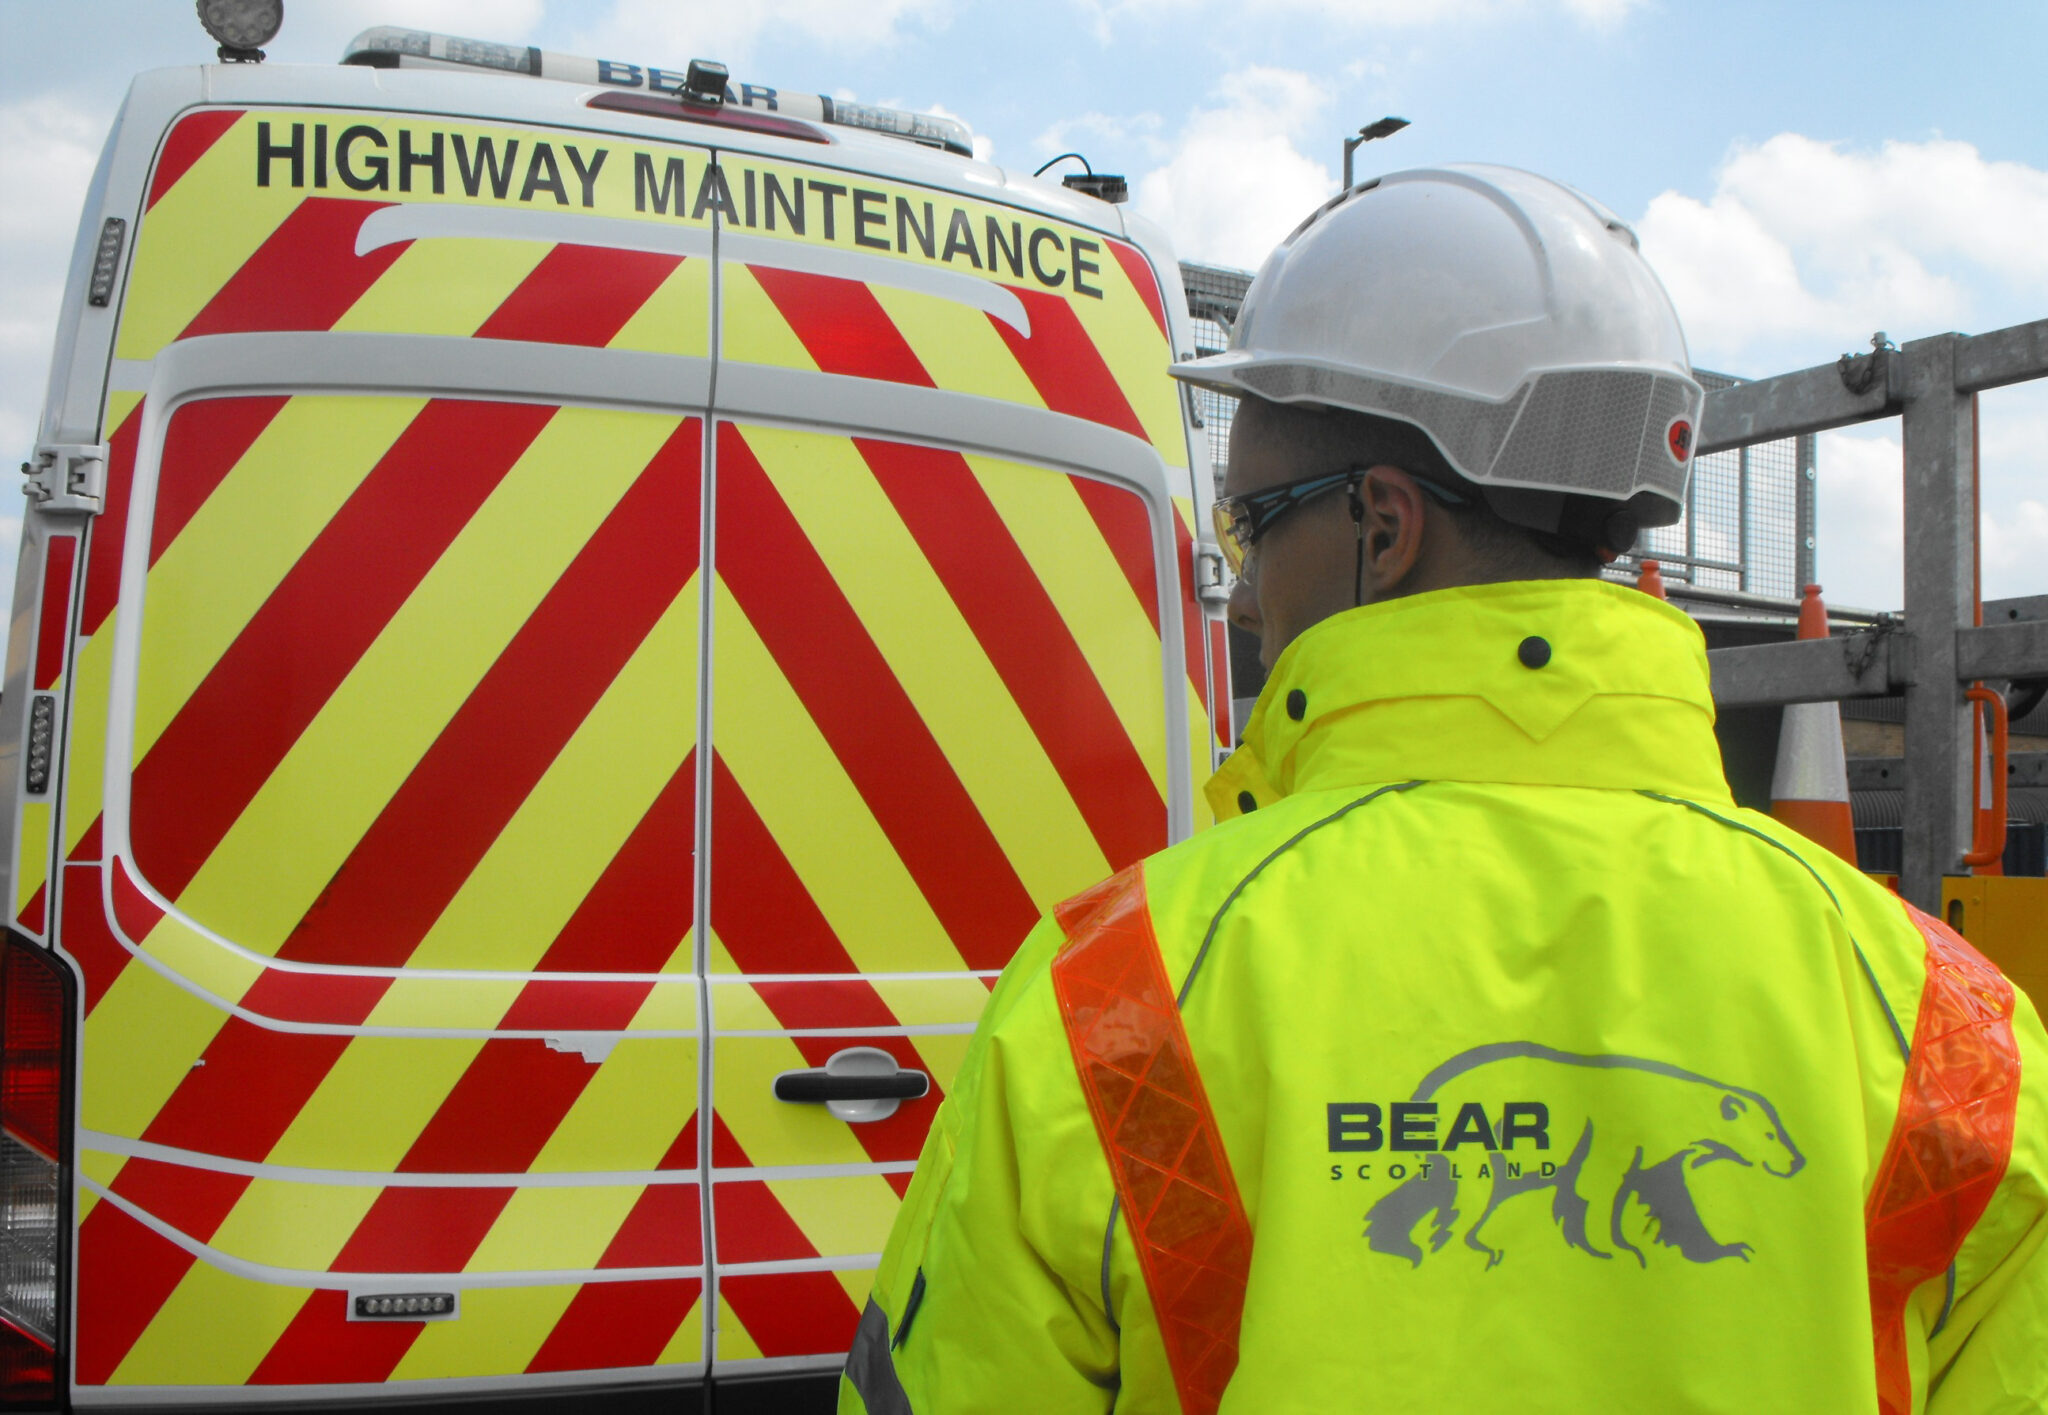  £750,000 resurfacing improvements planned for two locations on the A1